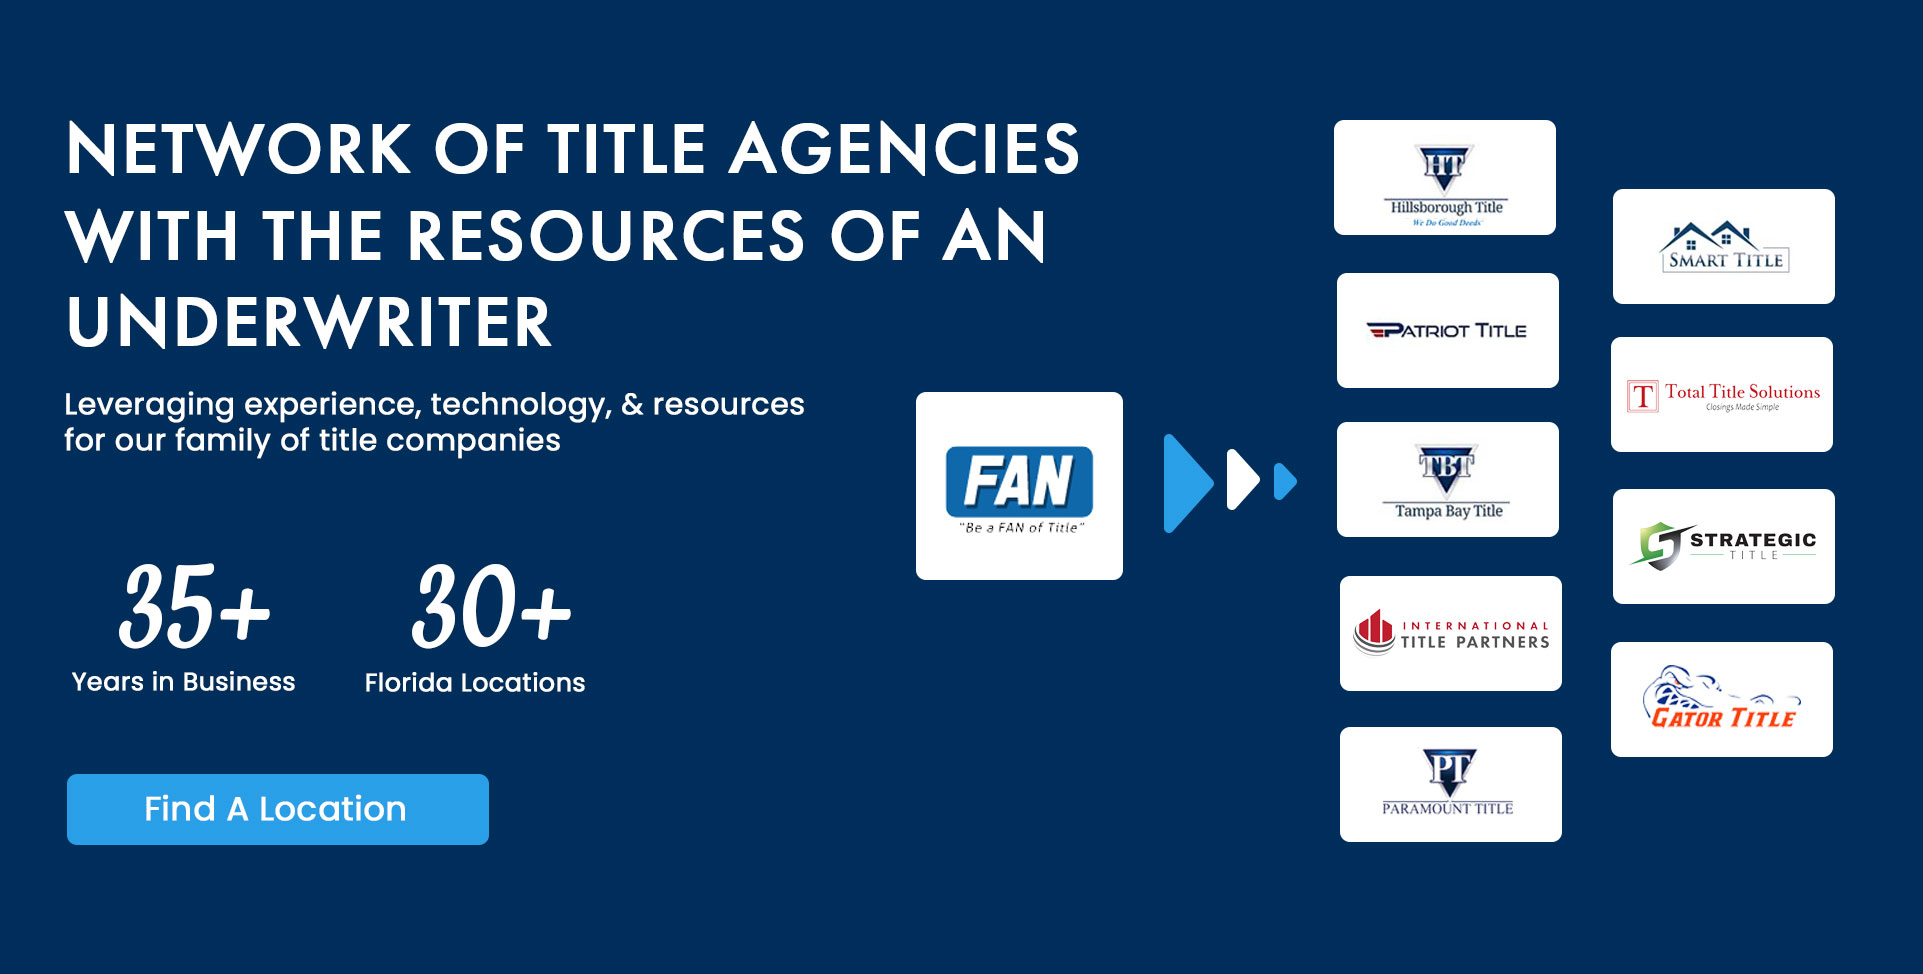 Network of title agencies